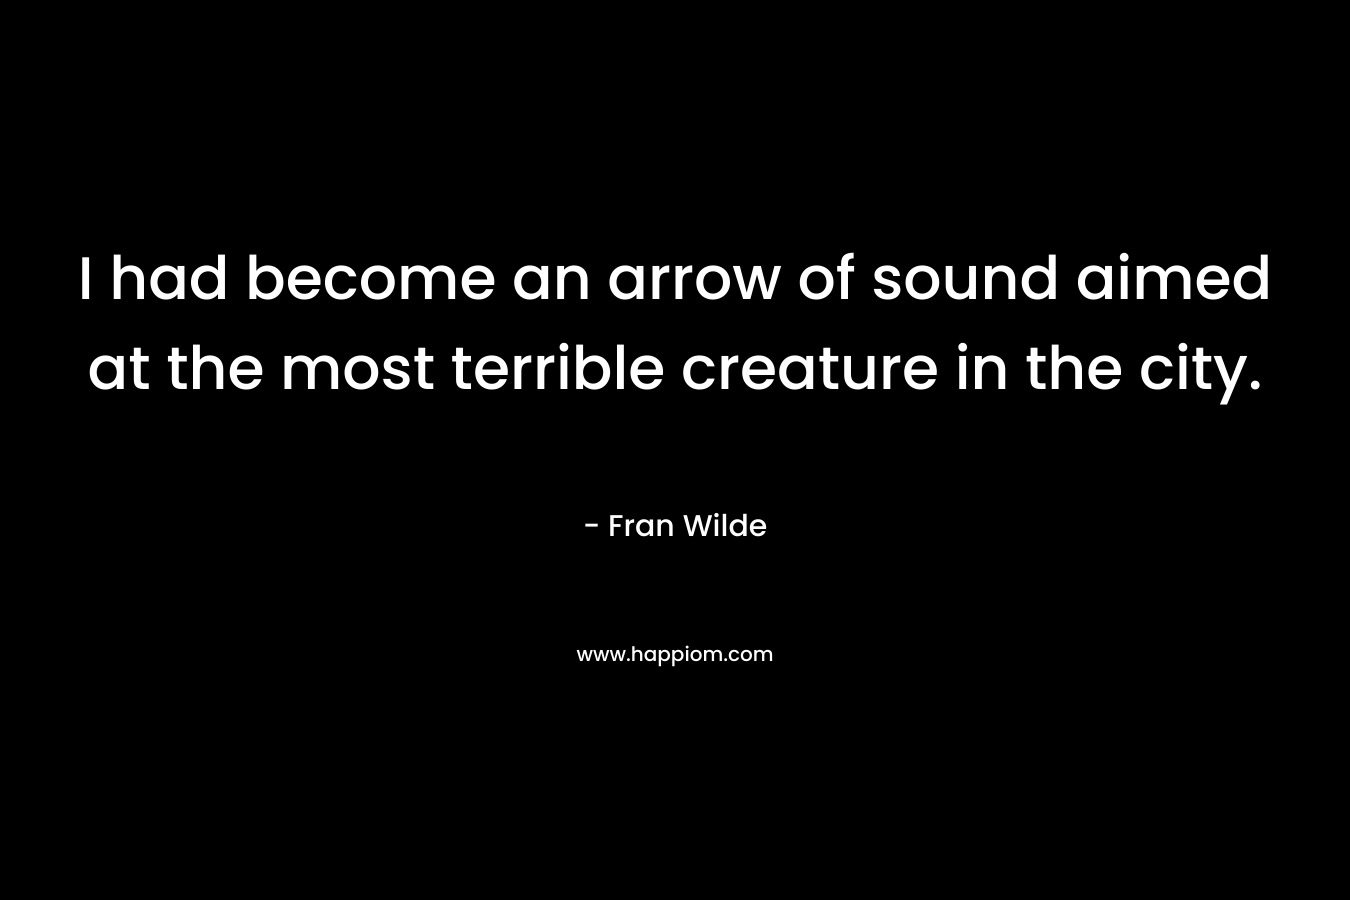 I had become an arrow of sound aimed at the most terrible creature in the city. – Fran Wilde